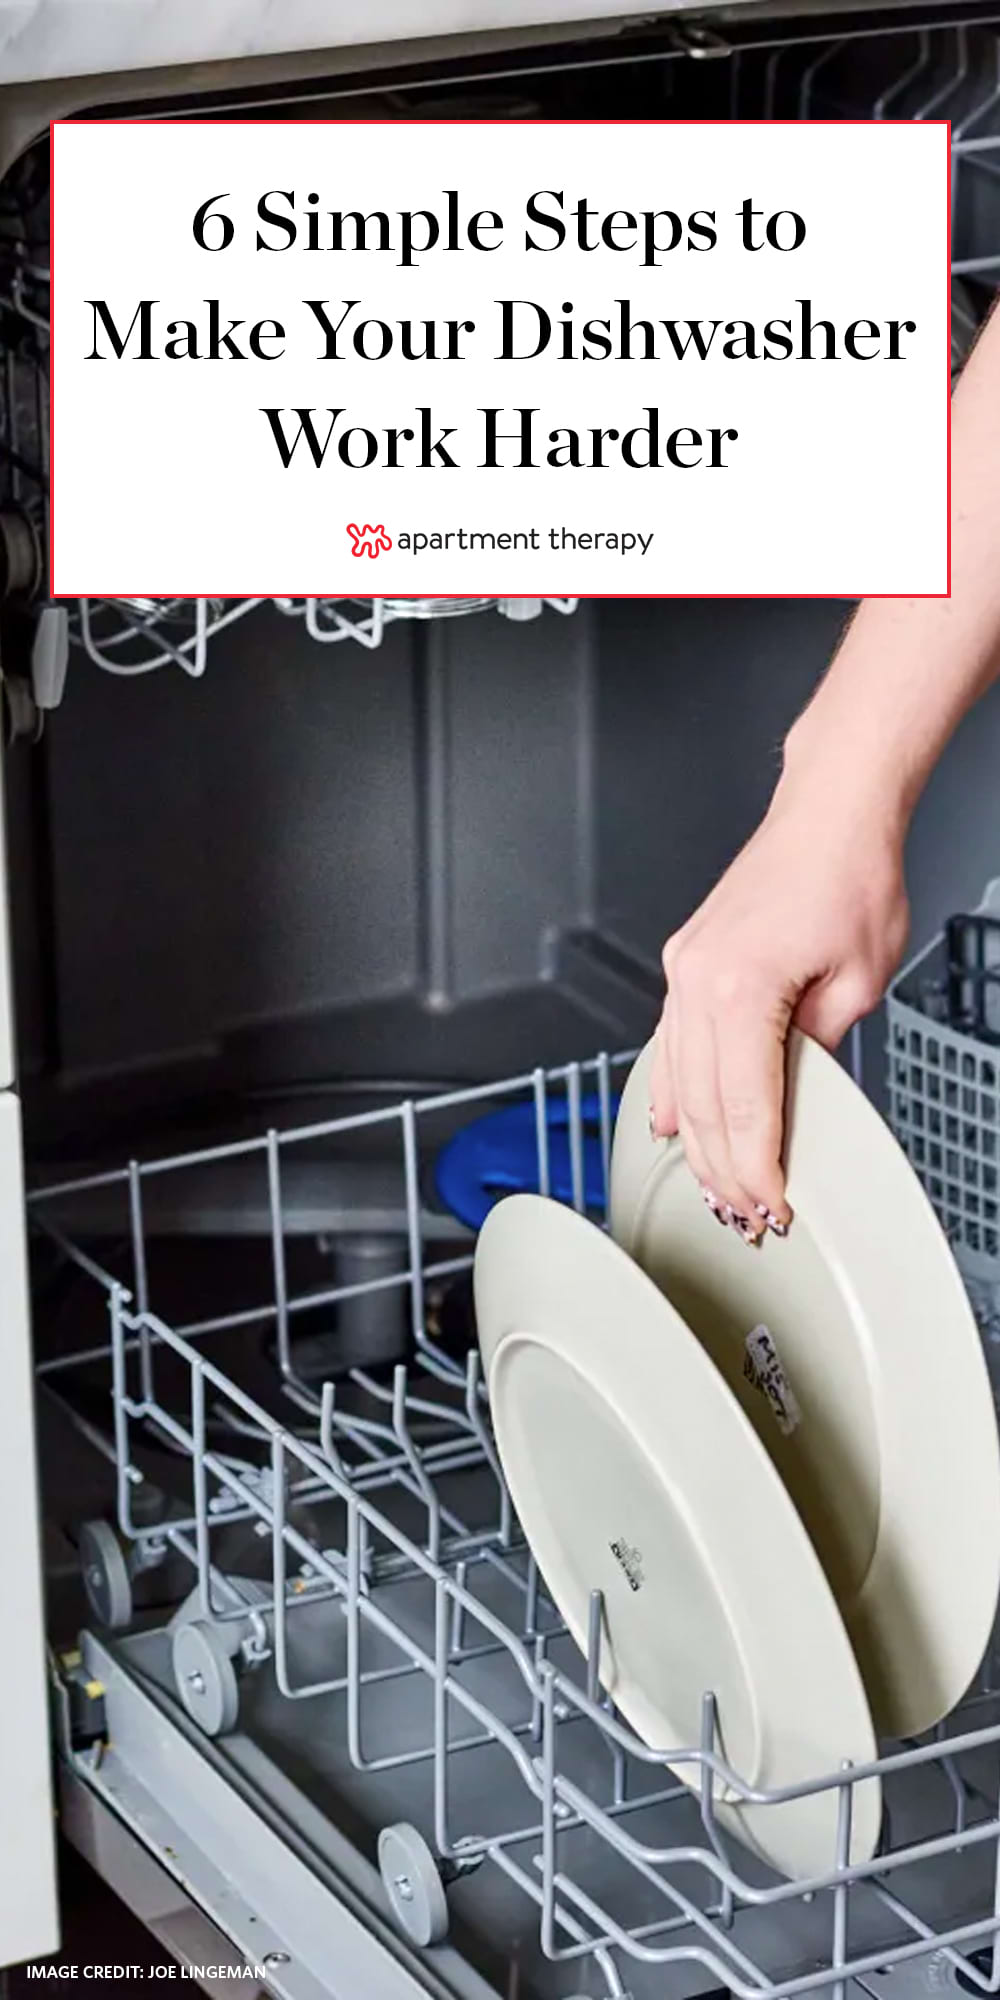 10 Tips for Making Your Dishwasher More Efficient